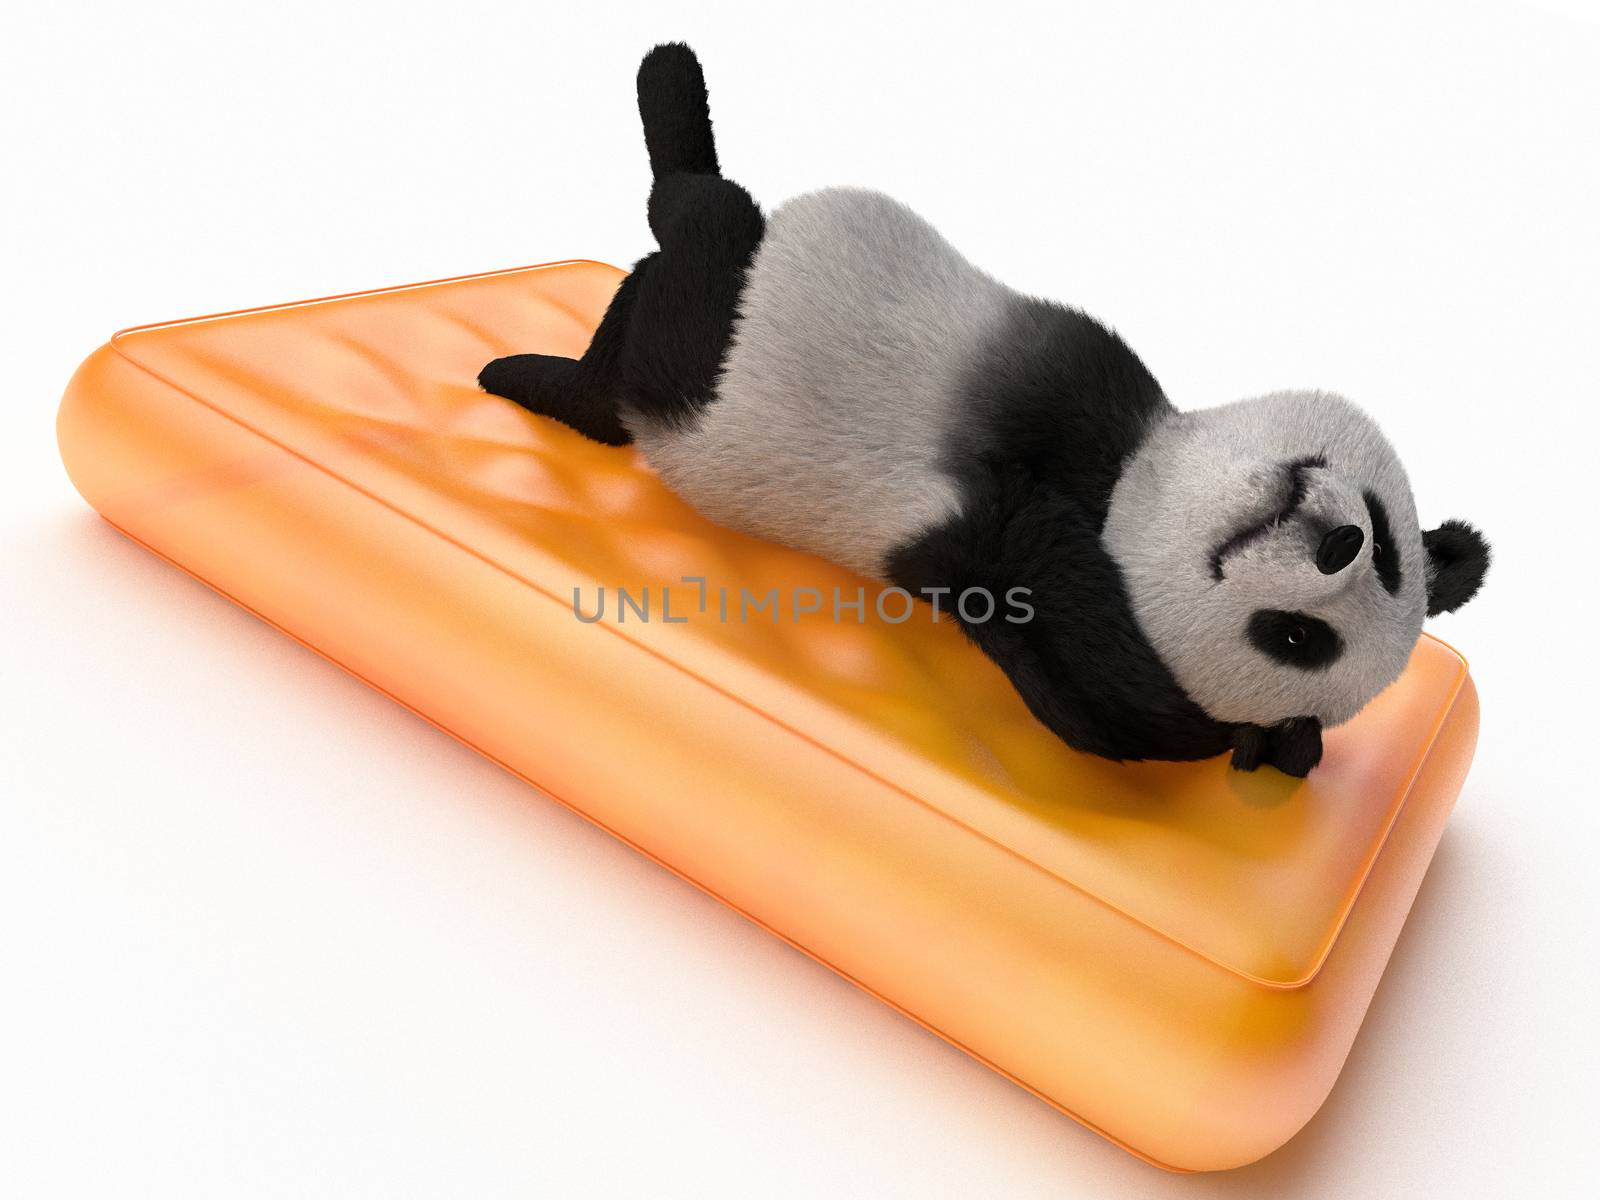 relaxed bear lying on back with hands clasped behind head on orange translucent inflatable mattress. mammal animal resting on bed. render illustration about tourism, leisure, recreation and holidays